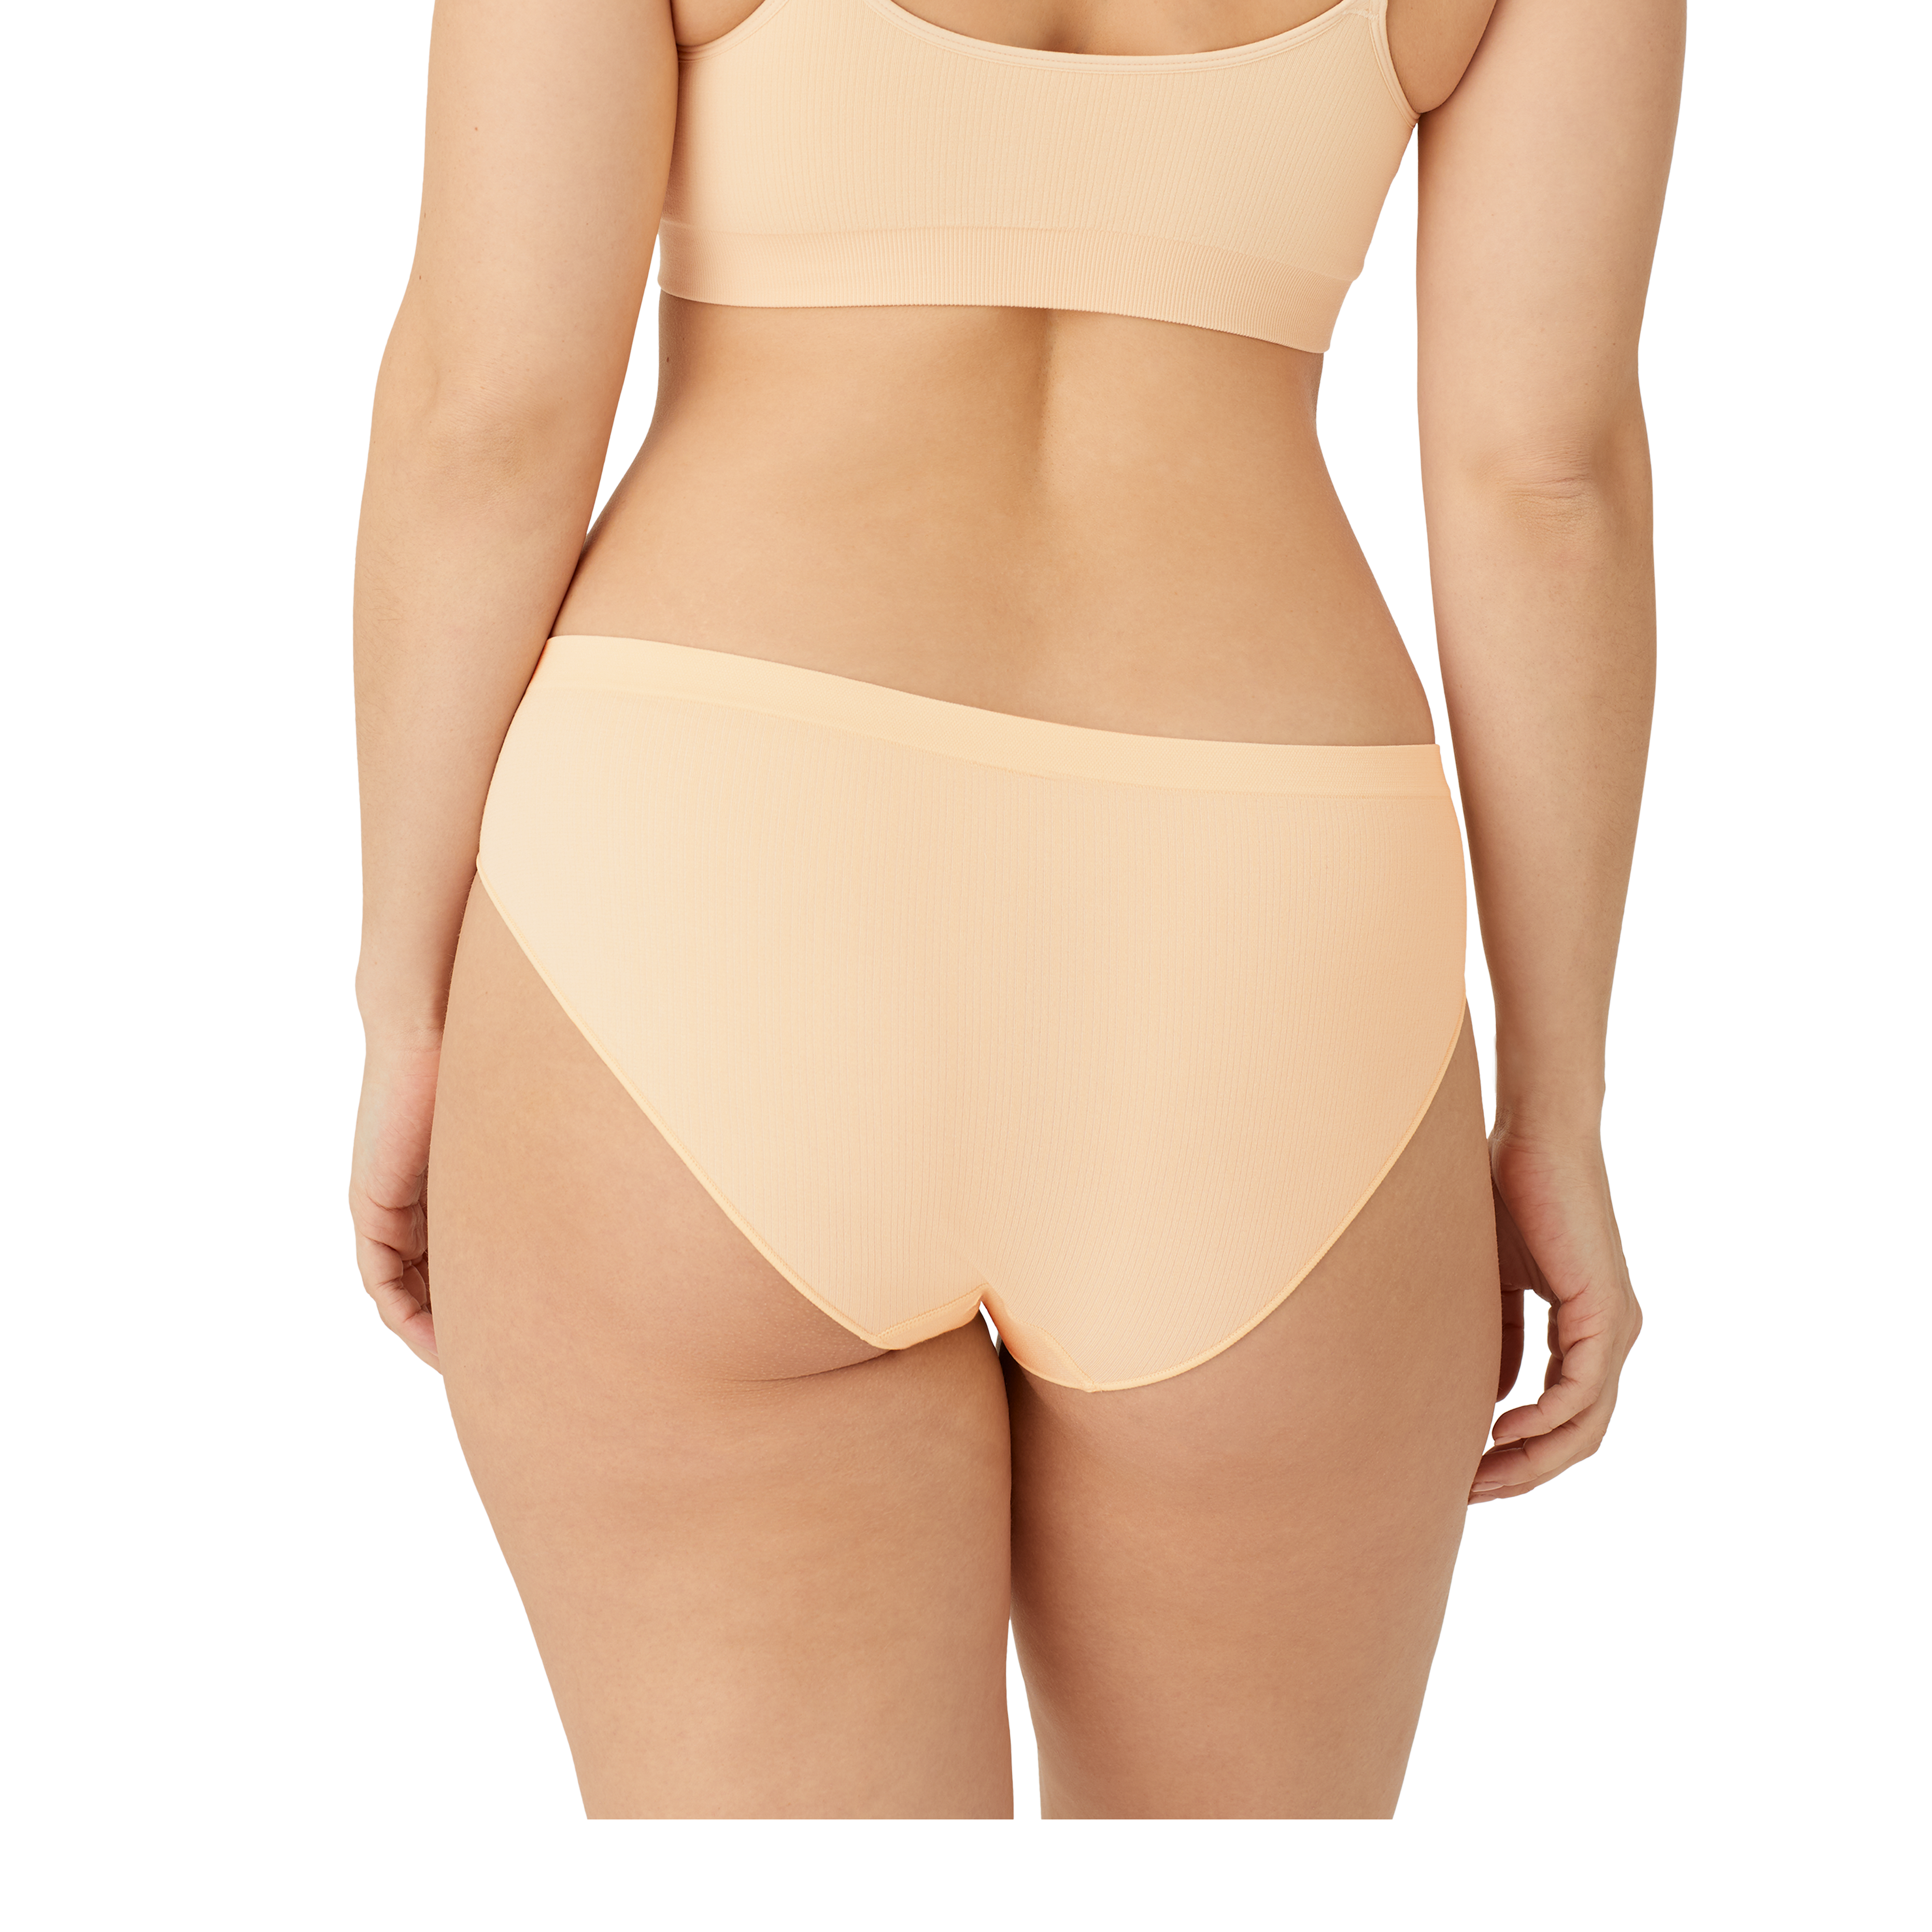 JOSERGO Womens Seamless Maternity Underwear Over Bump Belly Support  Pregnancy Panties Hi-Waisted Shapewear Brief 3 Pack